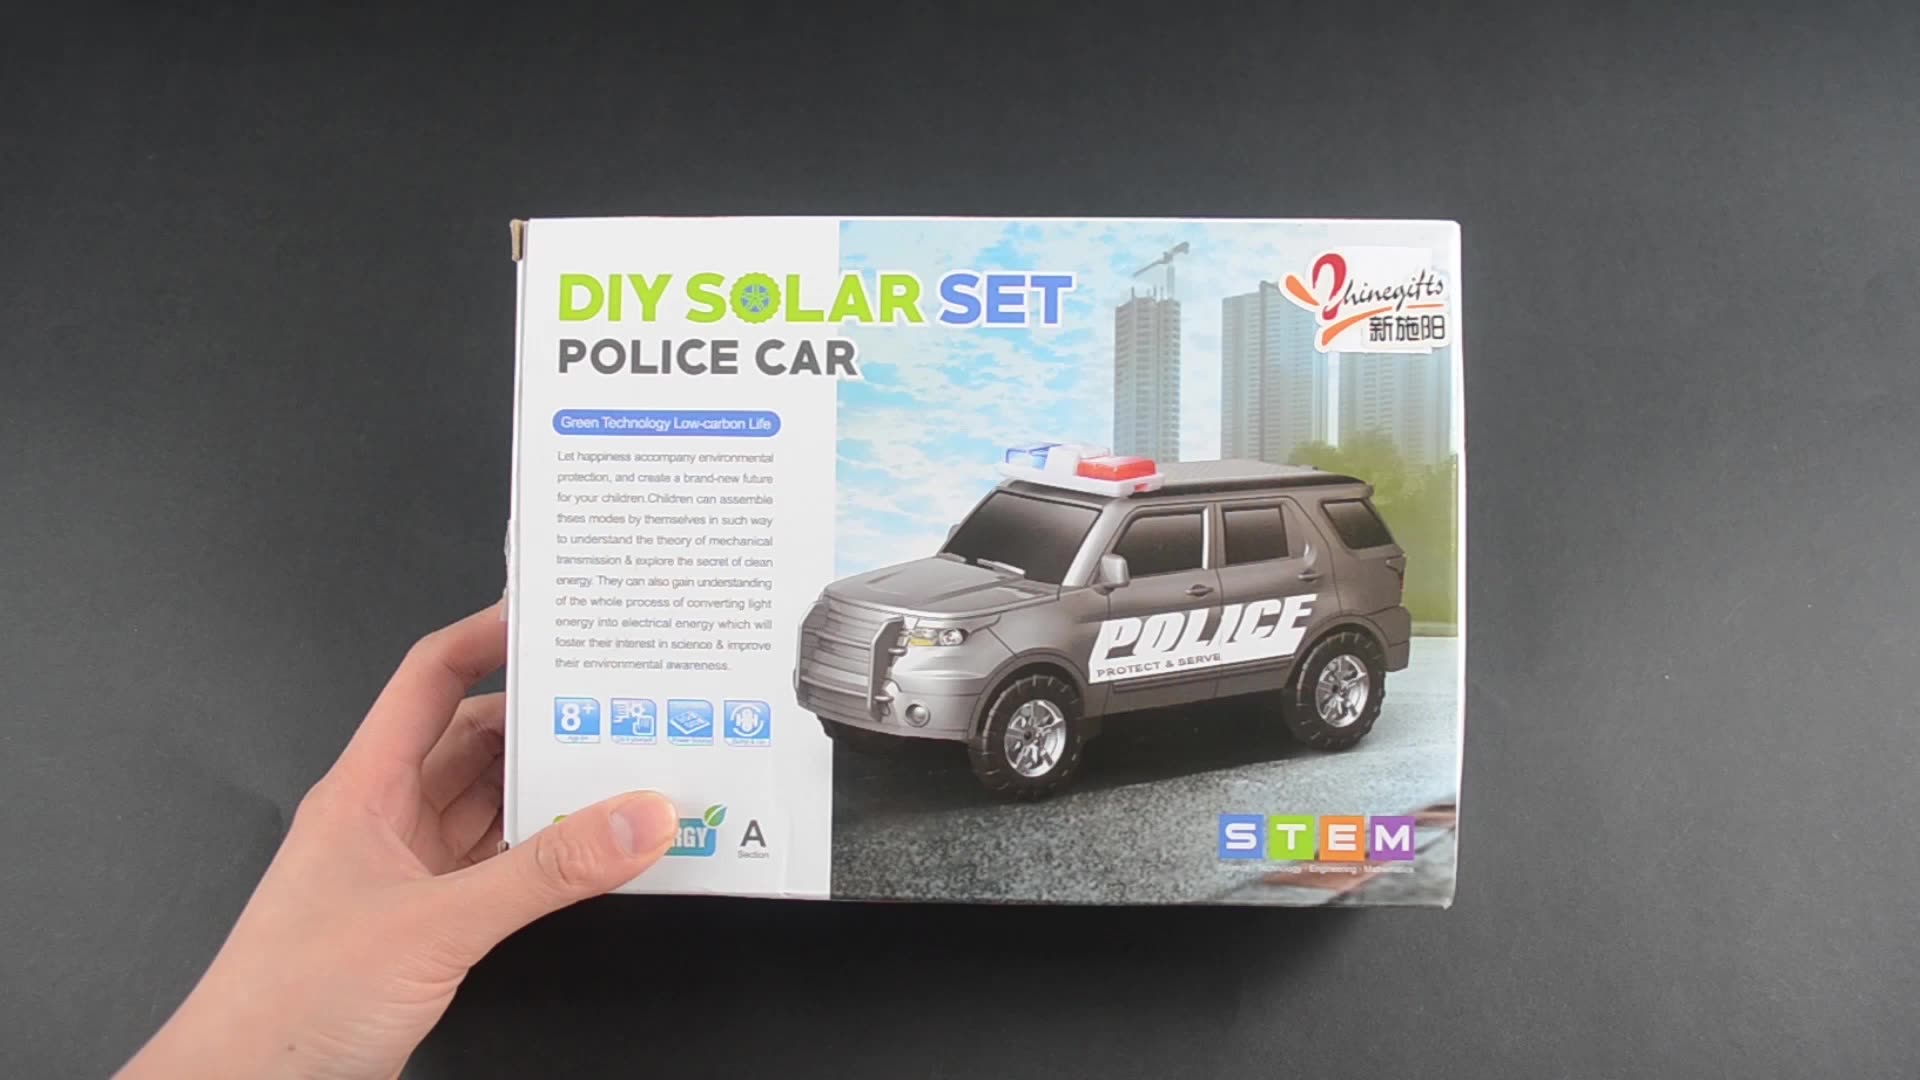 Competitive Price Robot Kits Police Car Diy Handmade Science Toy Fun for Kids Best Gifts Stem Education Science Toys1